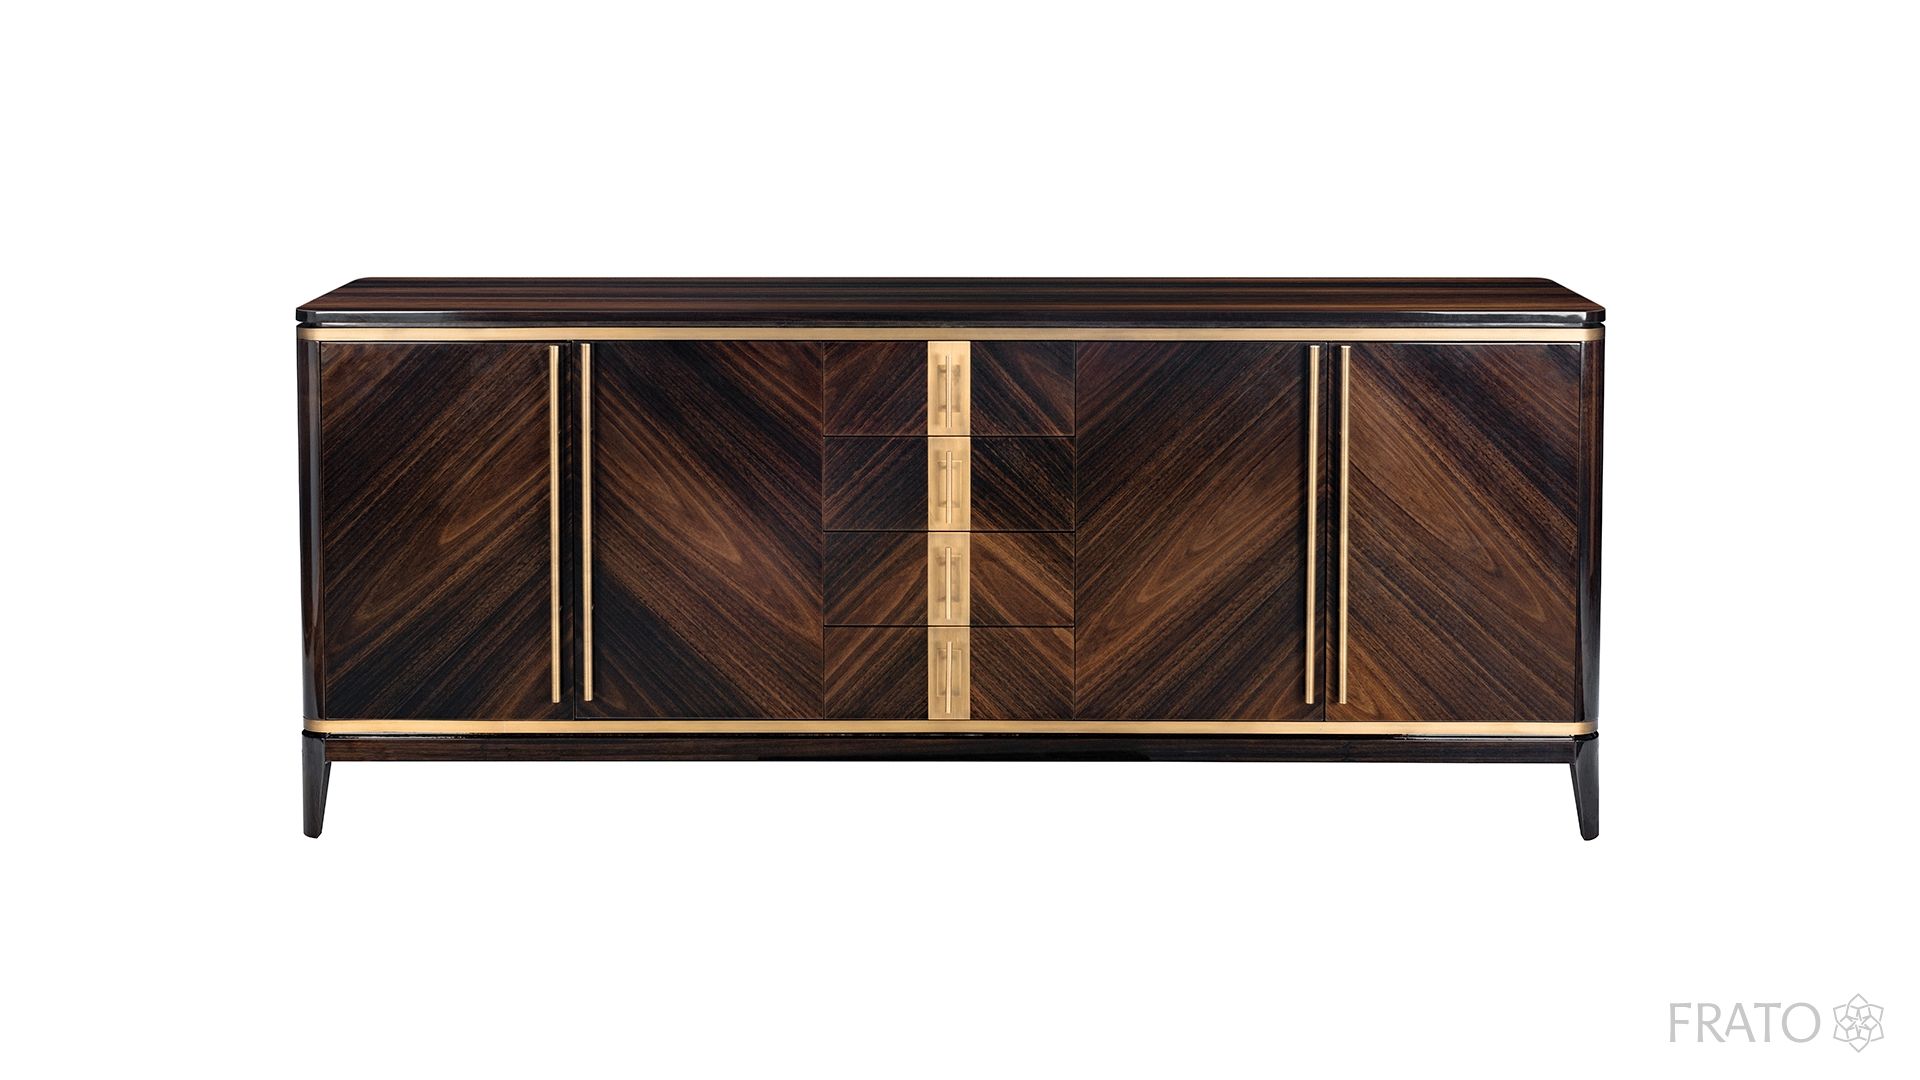 Siena | Shelves | Pinterest | Furniture, Sideboard And Cabinet For Most Popular Rani 4 Door Sideboards (View 9 of 20)